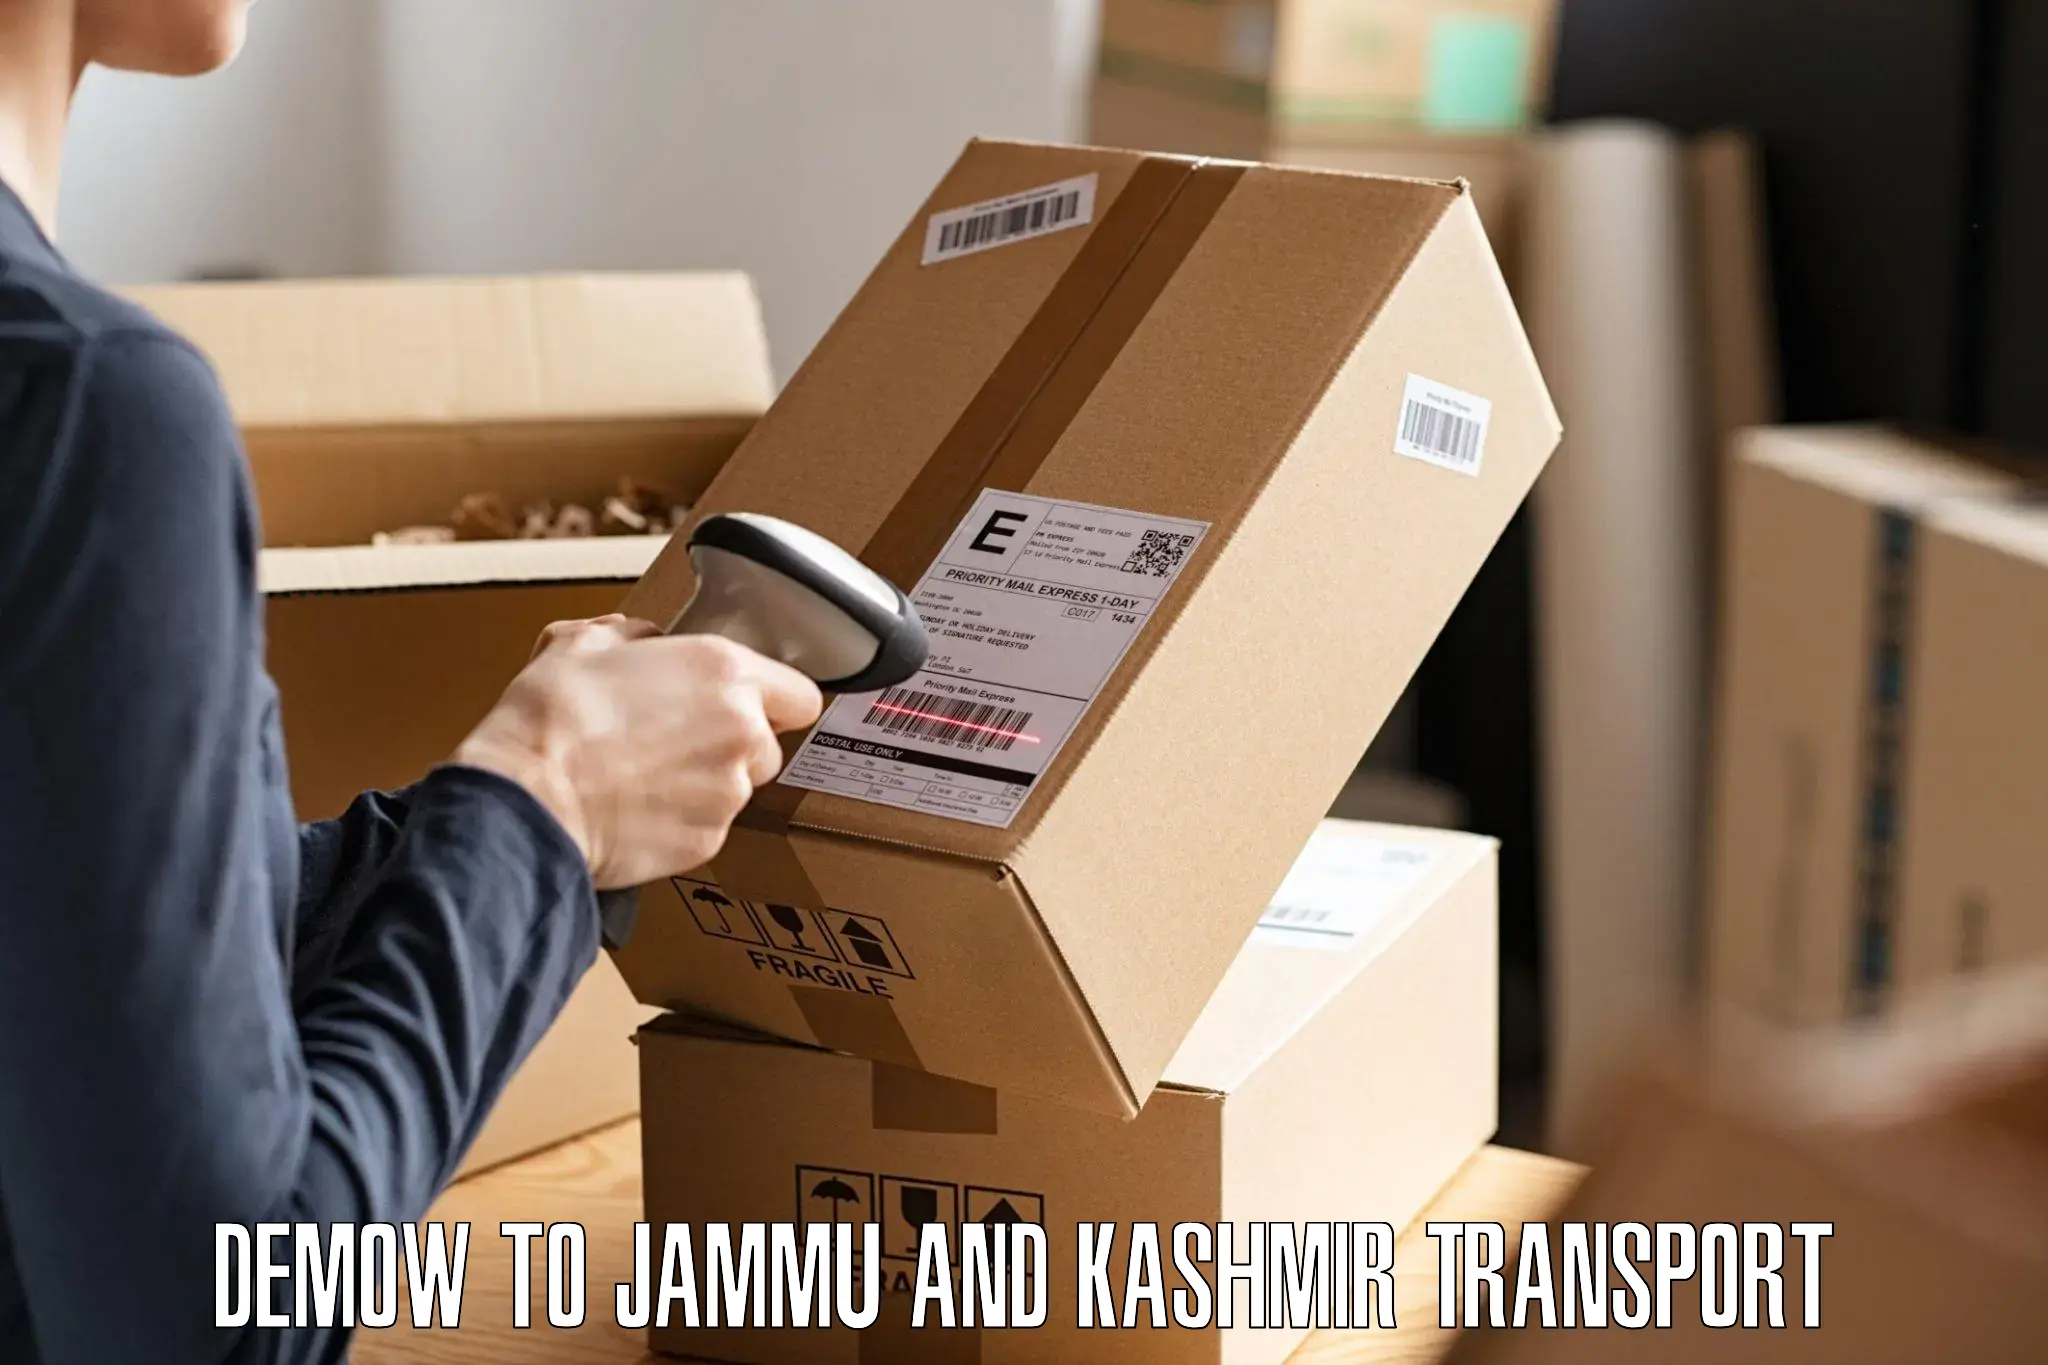 Parcel transport services Demow to Jammu